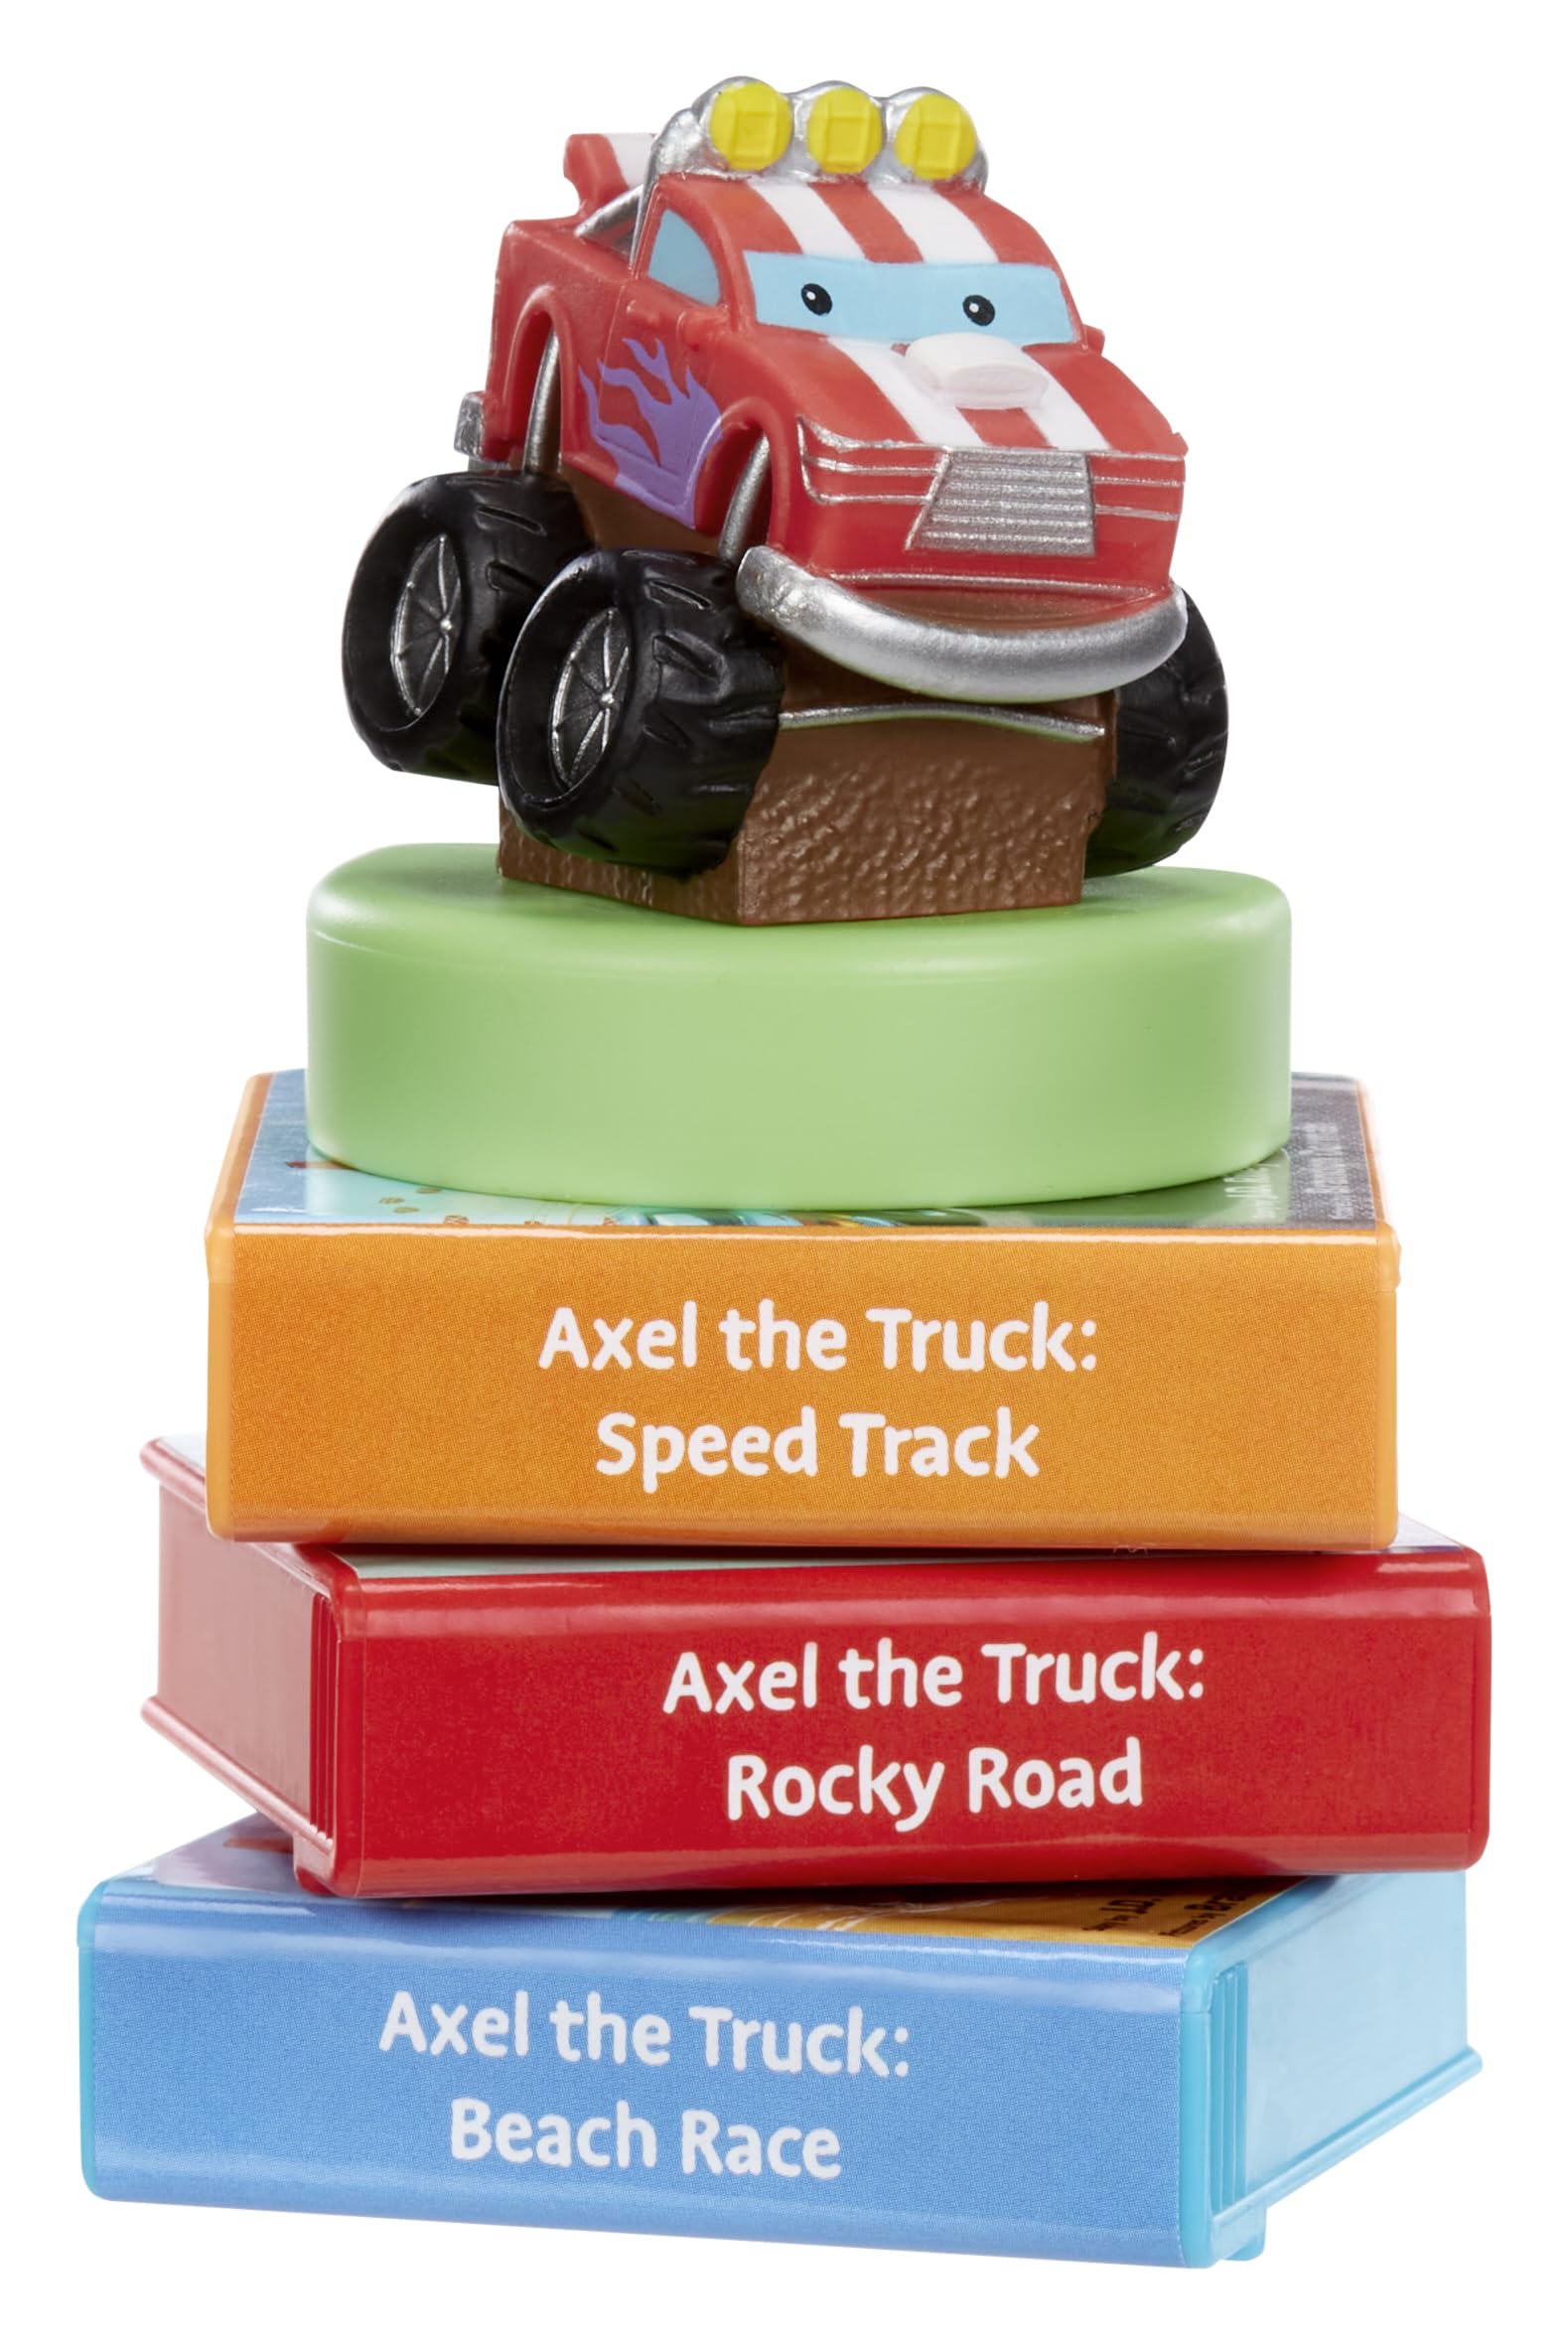 Little Tikes Story Dream Machine Axel The Truck Story Collection, Storytime, Books, HarperCollins, Audio Play Character, Gift and Toy for Ages 3+ Years